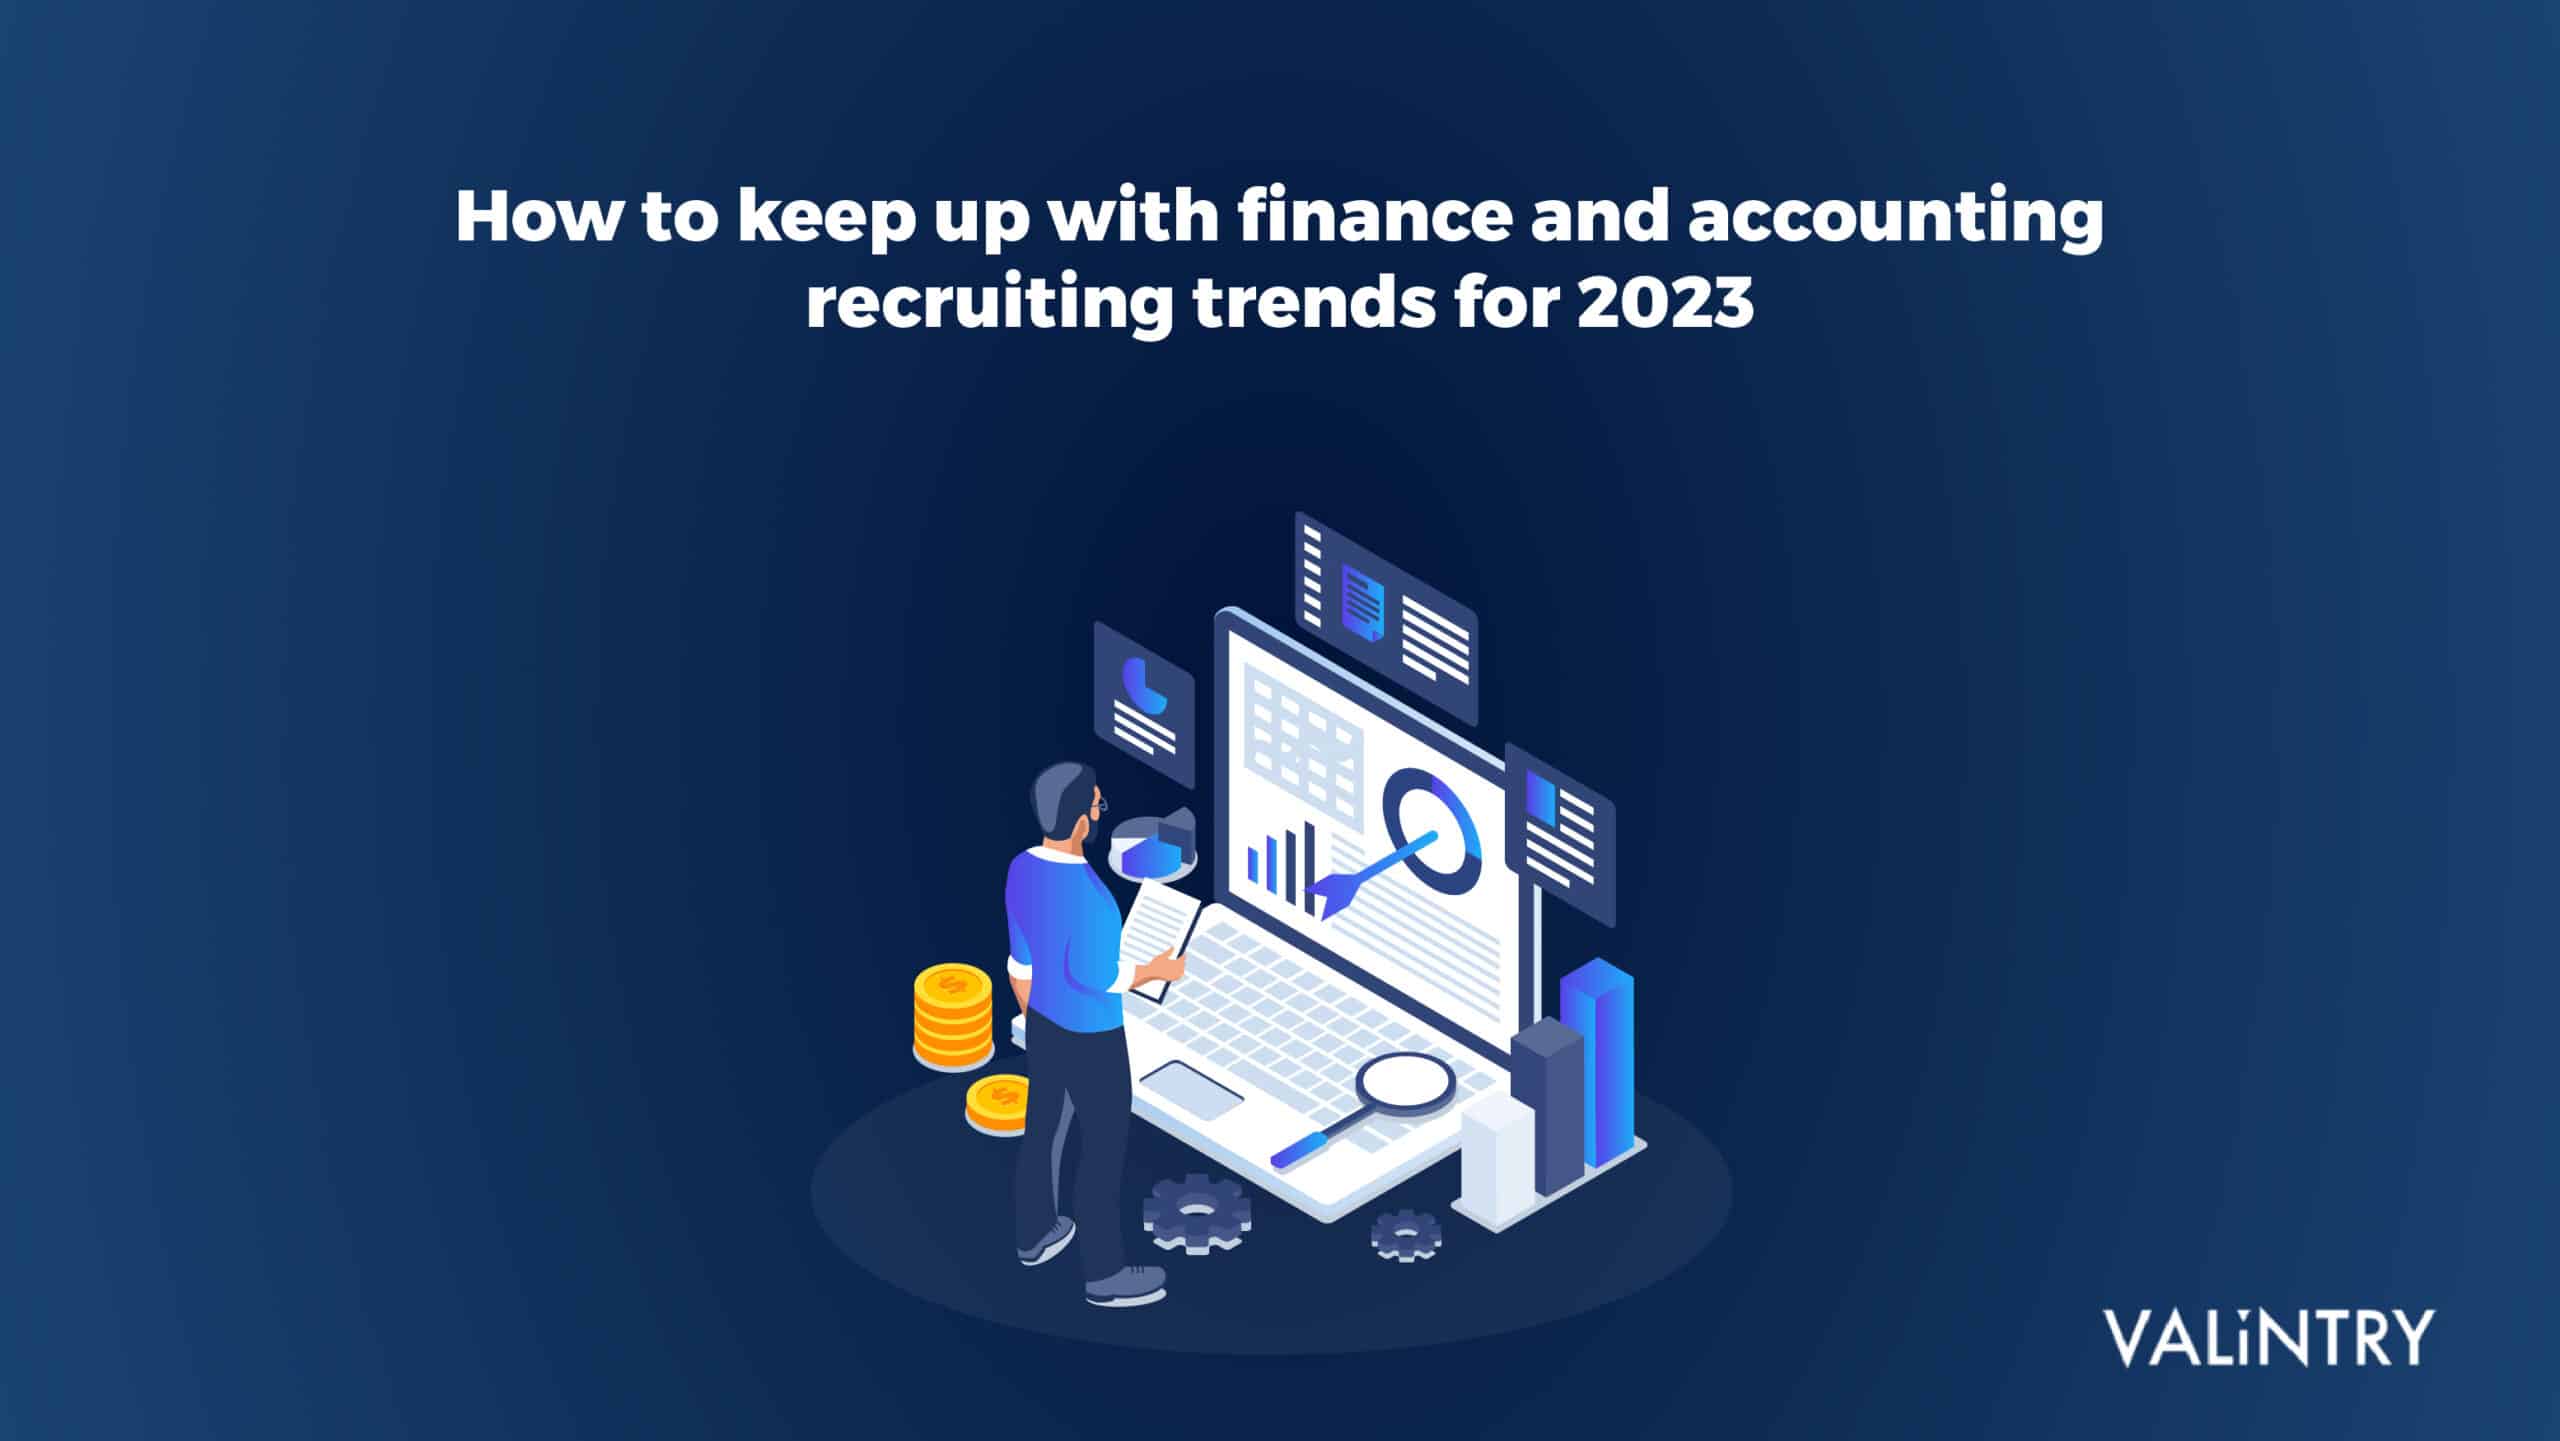 How to Keep Up With Finance and Accounting Recruiting Trends for 2023